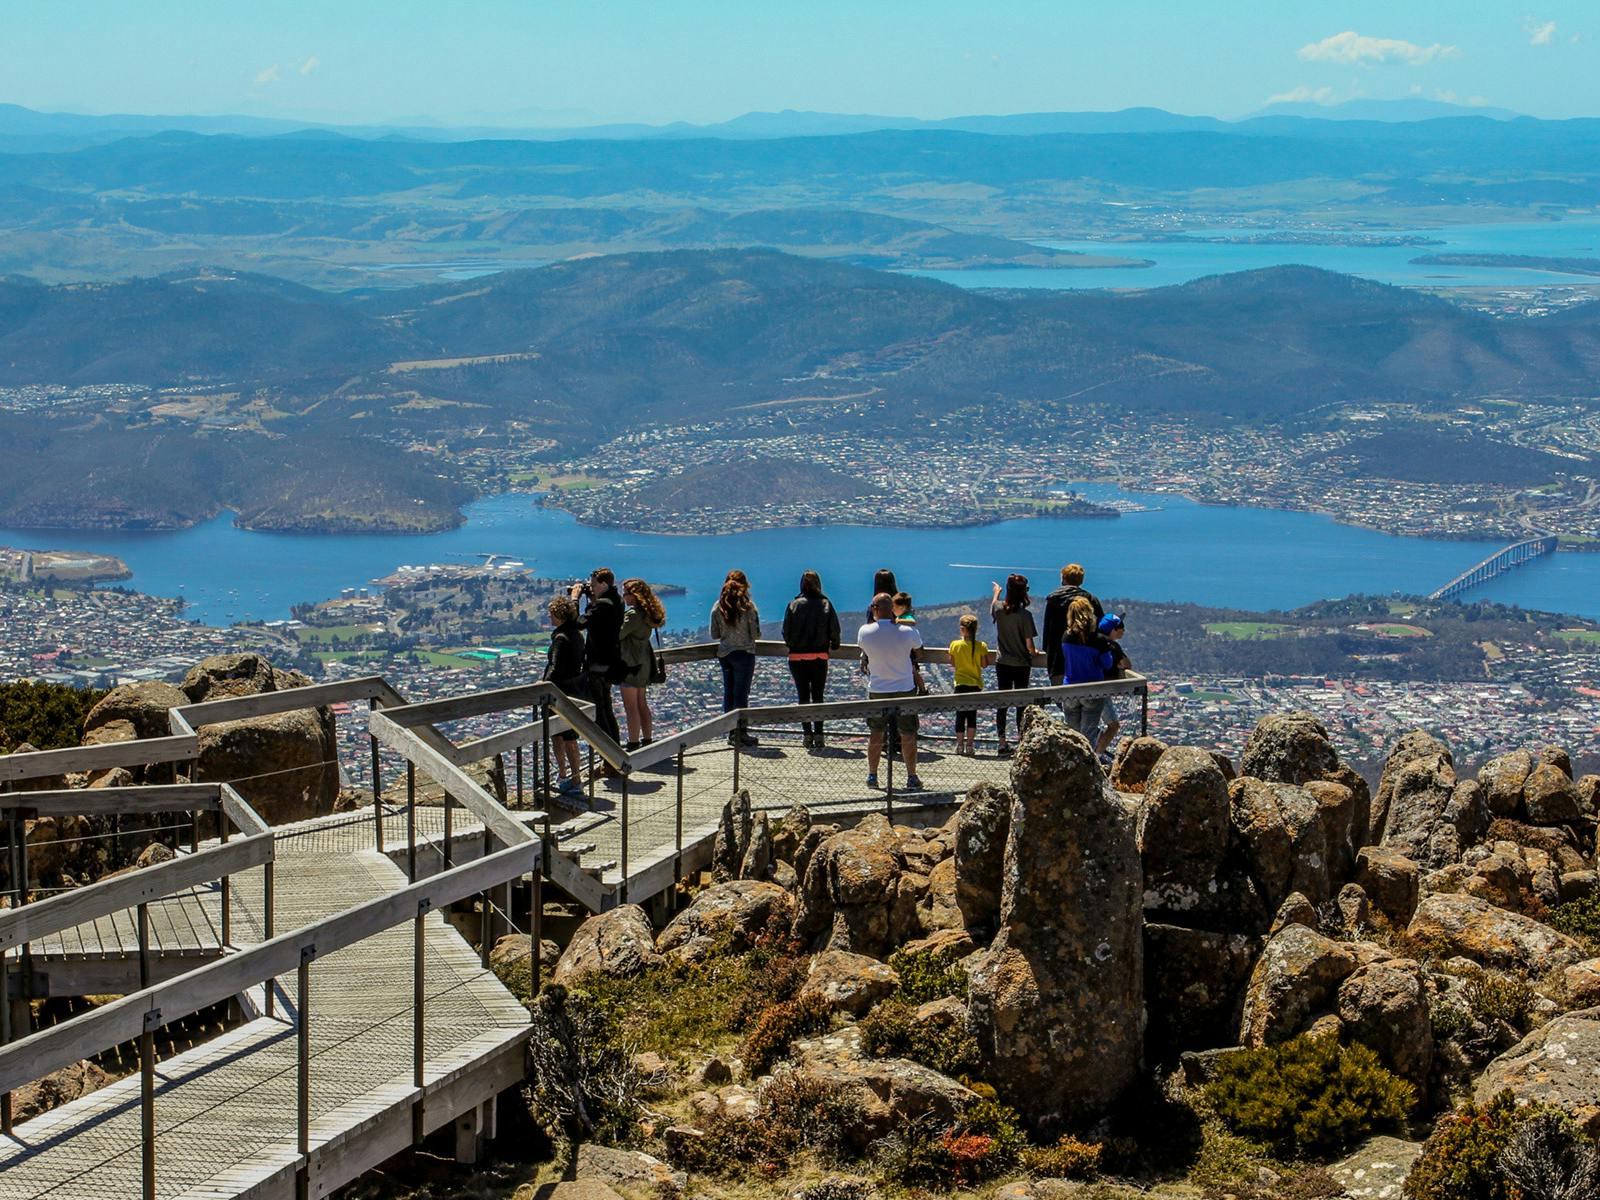 View of Hobart from Mt Wellington/kunanyi Lookout